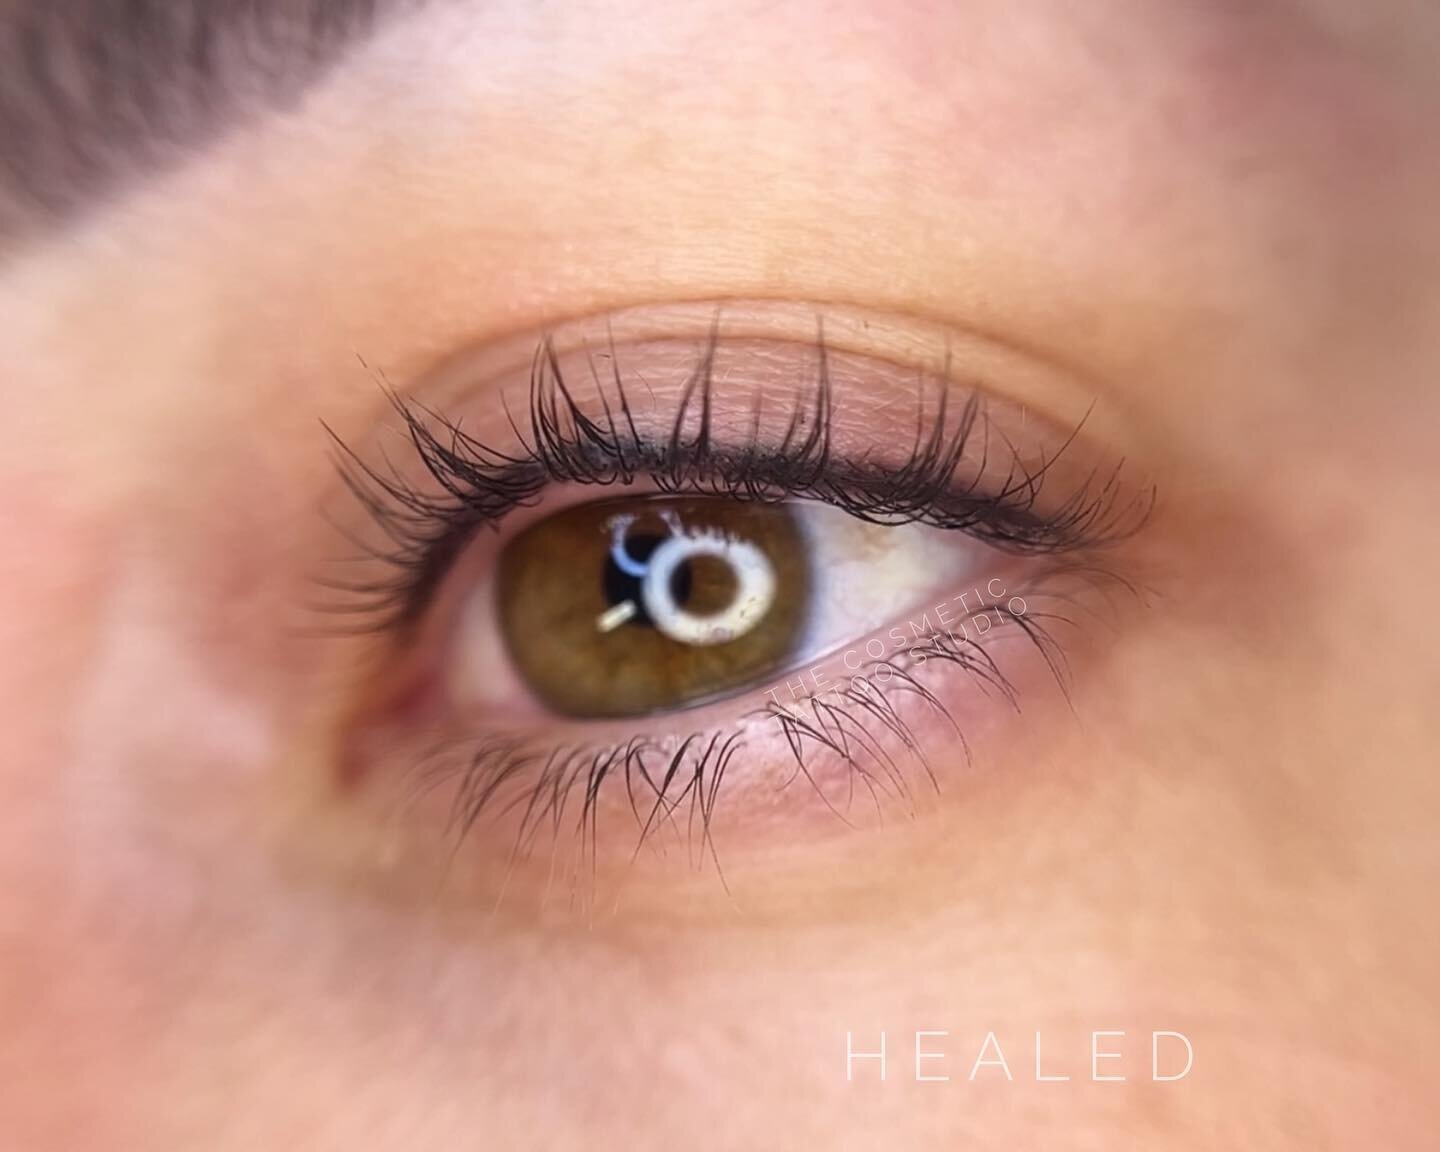 HEALED lash enhancement eyeliner tattoo 🖤

The perfect way to define the eyes and darker the lash line while still looking ultra natural! ✨

Artist: Amber 

Amber only has a few appointments left in the next month!

ONLINE BOOKINGS 
www.thecosmetict